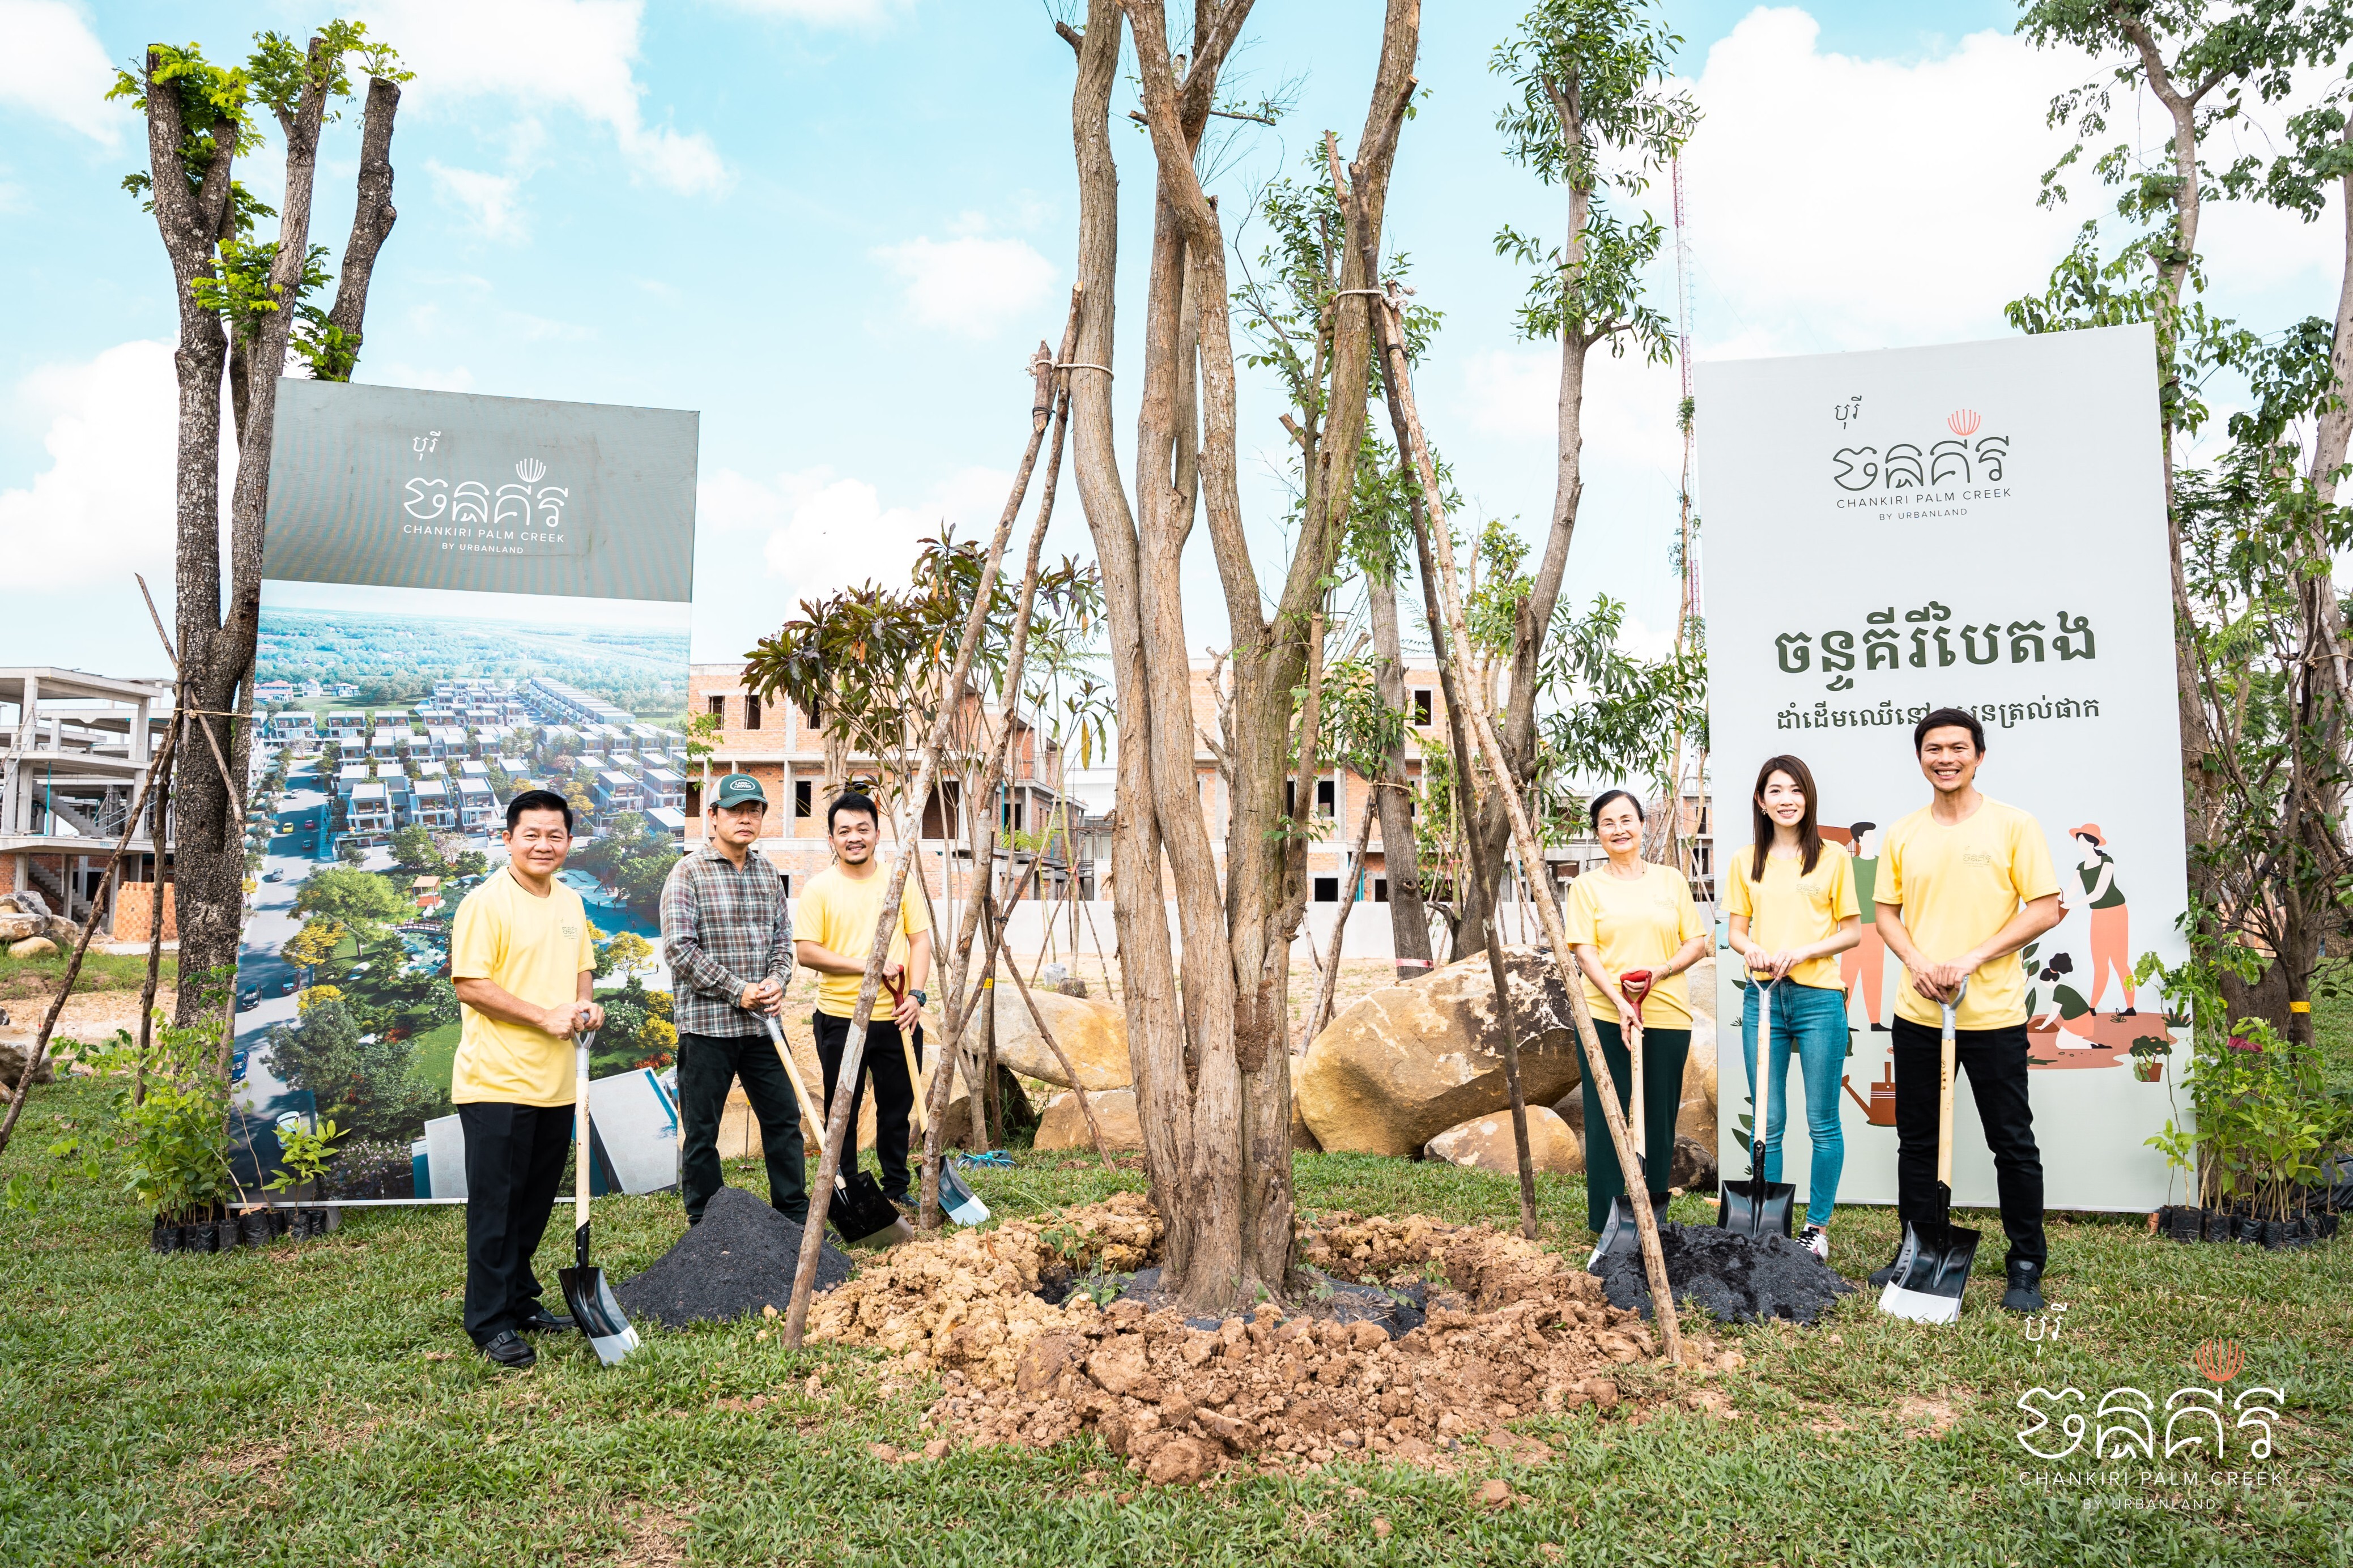 From left: Chankiri homeowners and Urbanland representatives officially commended the tree-planting ceremony at Central Park